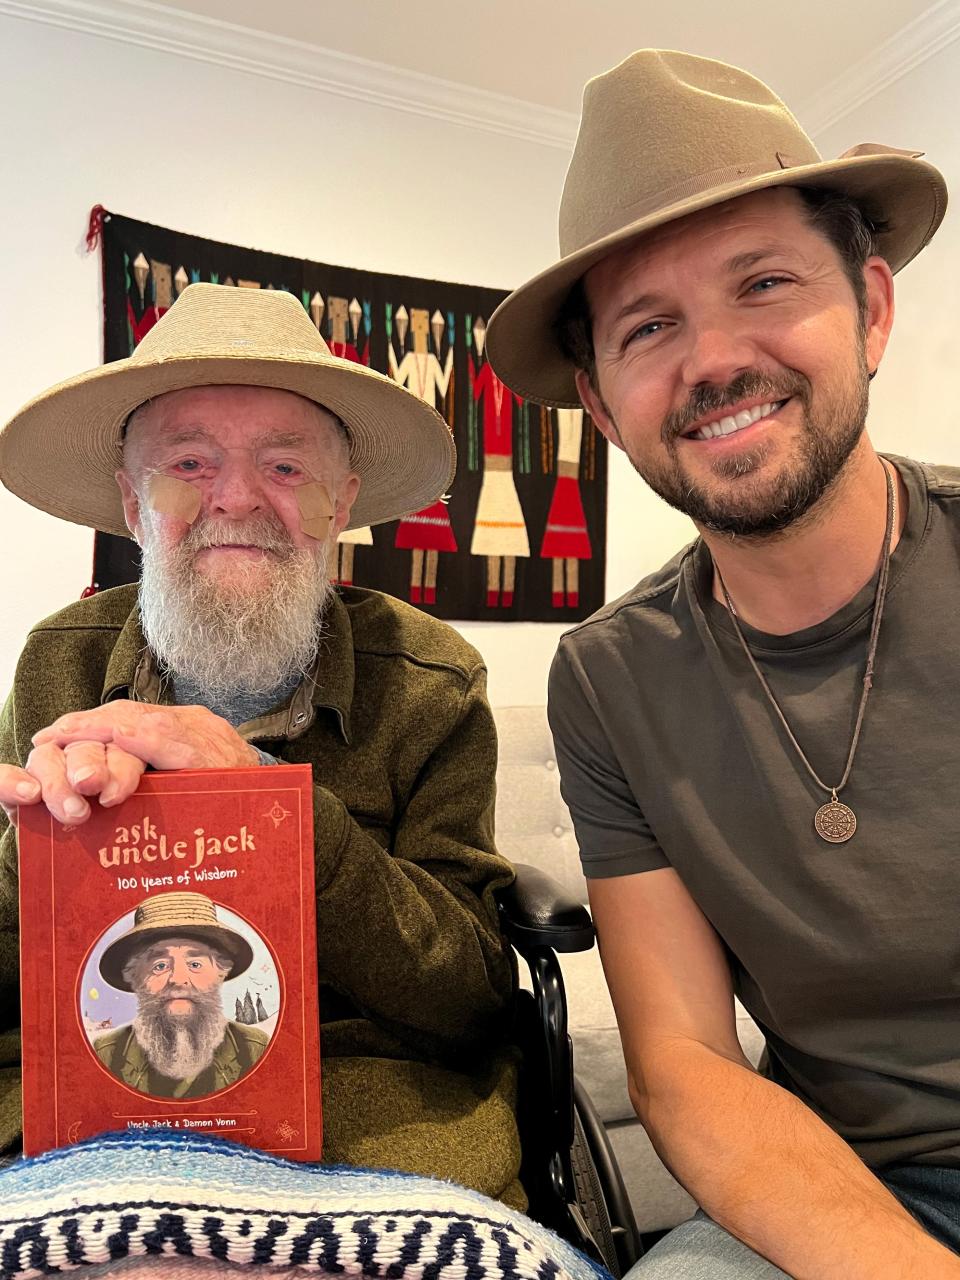 Unlce Jack holding his book, "Ask Uncle Jack: 100 Years of Wisdom," and his grand-nephew, Damon